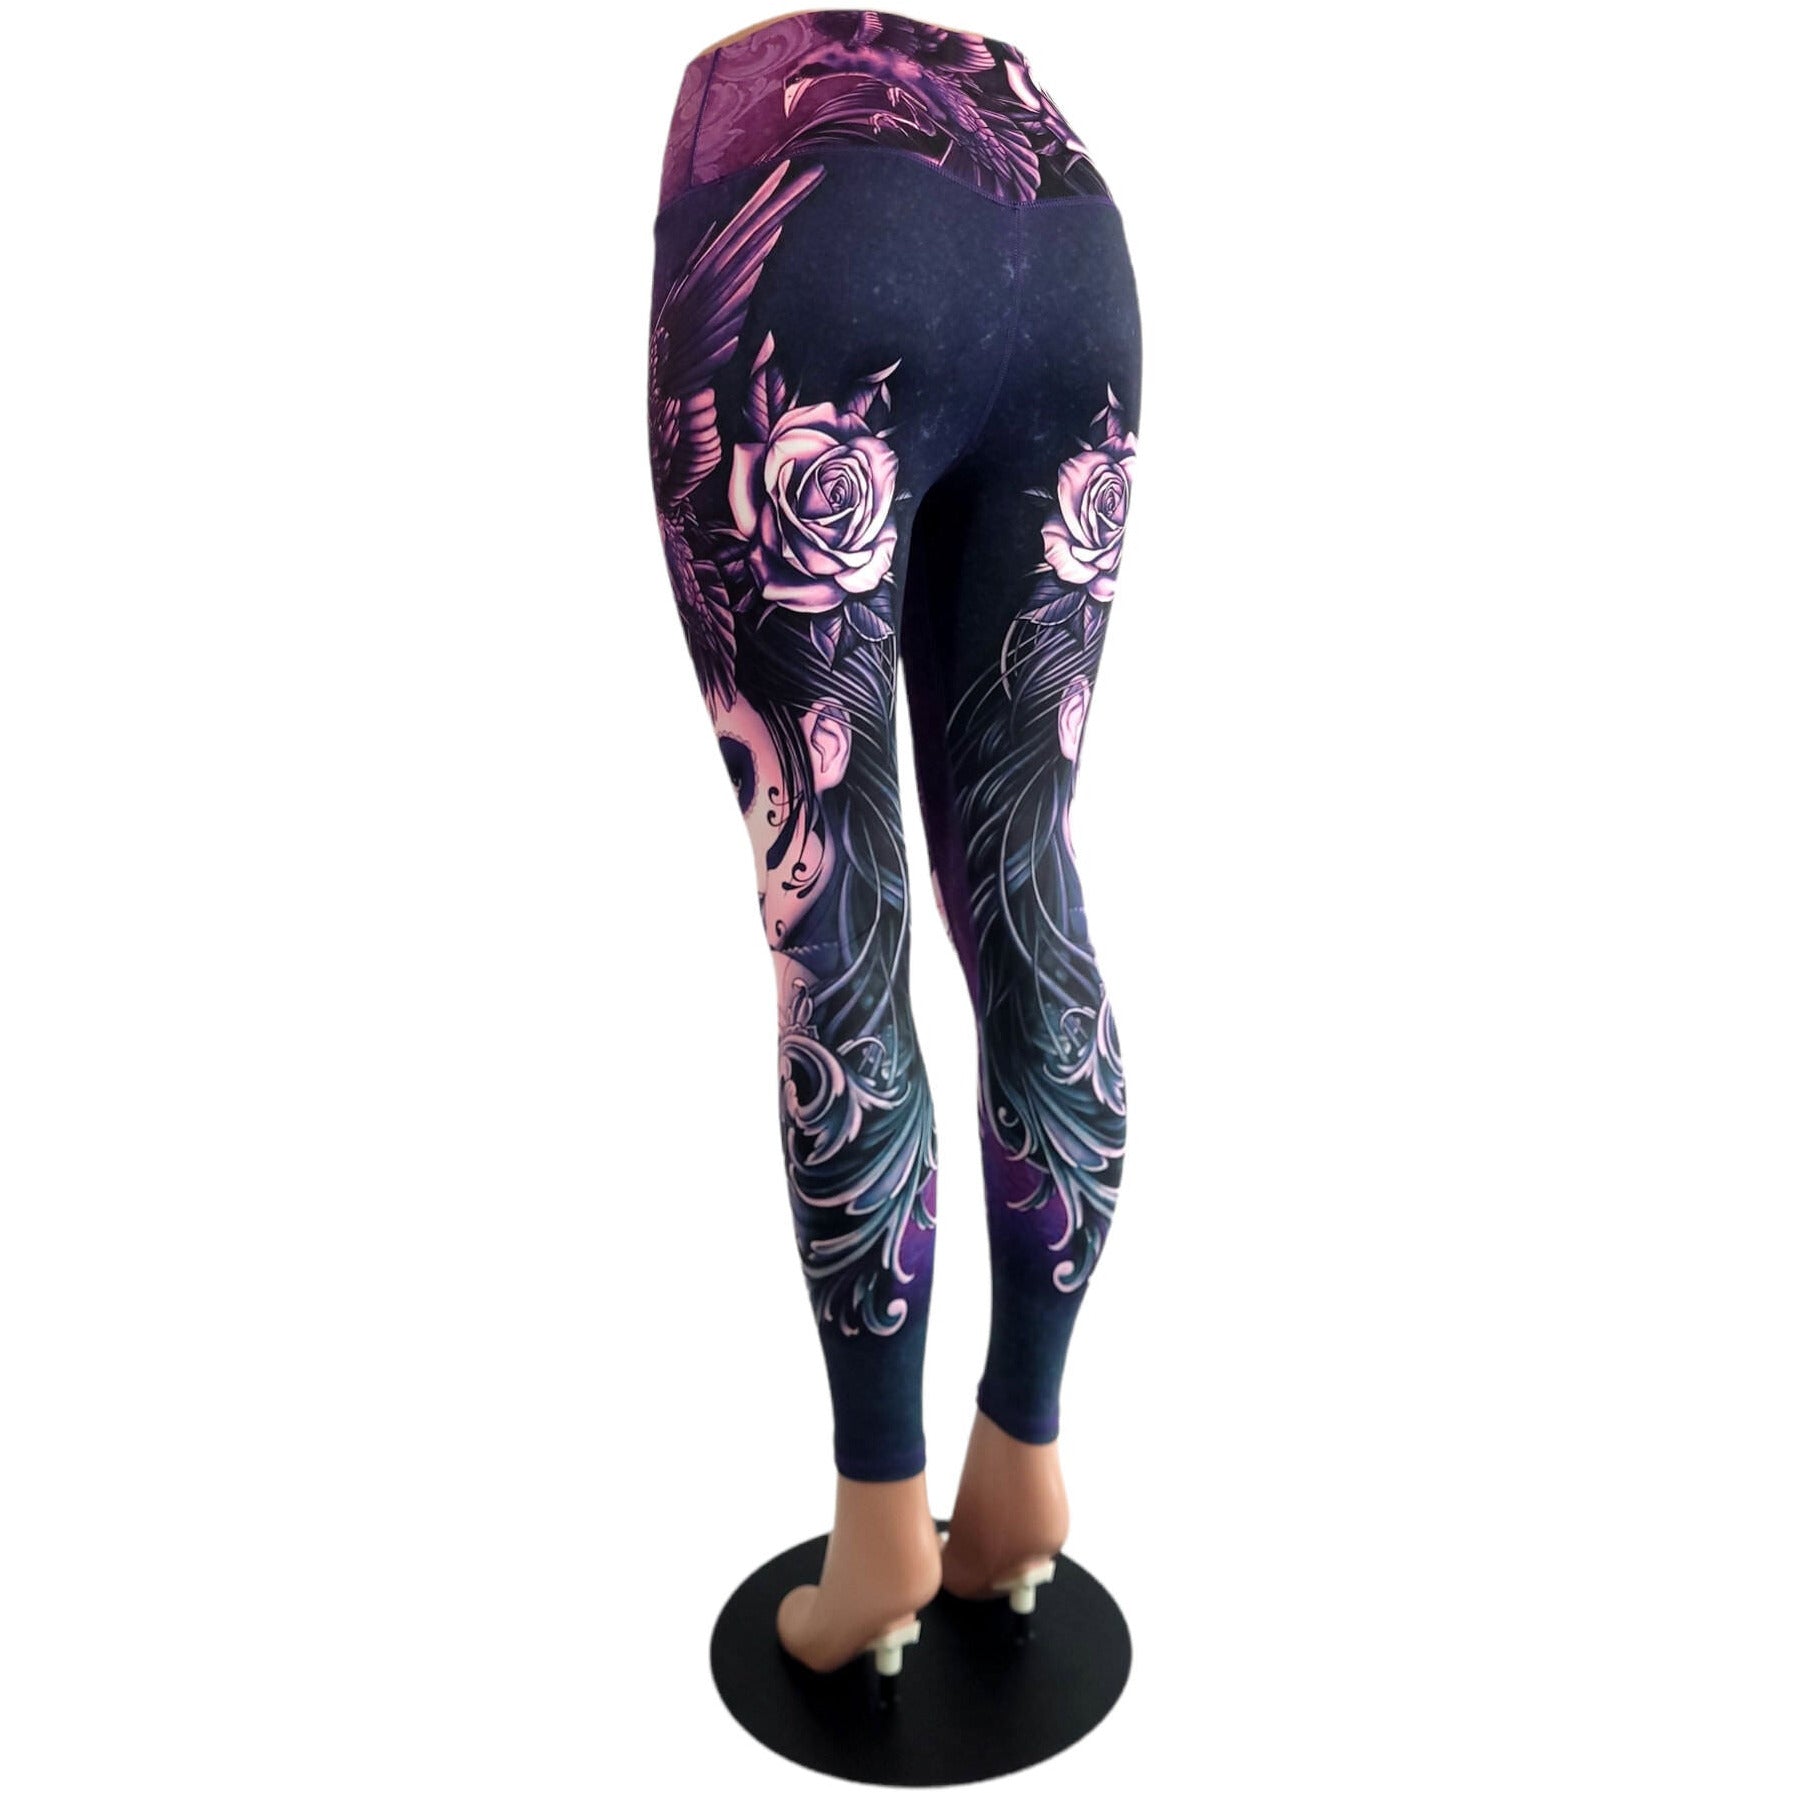  Music Legs Sugar Skull Print Tights, Black/White, One Size:  Clothing, Shoes & Jewelry